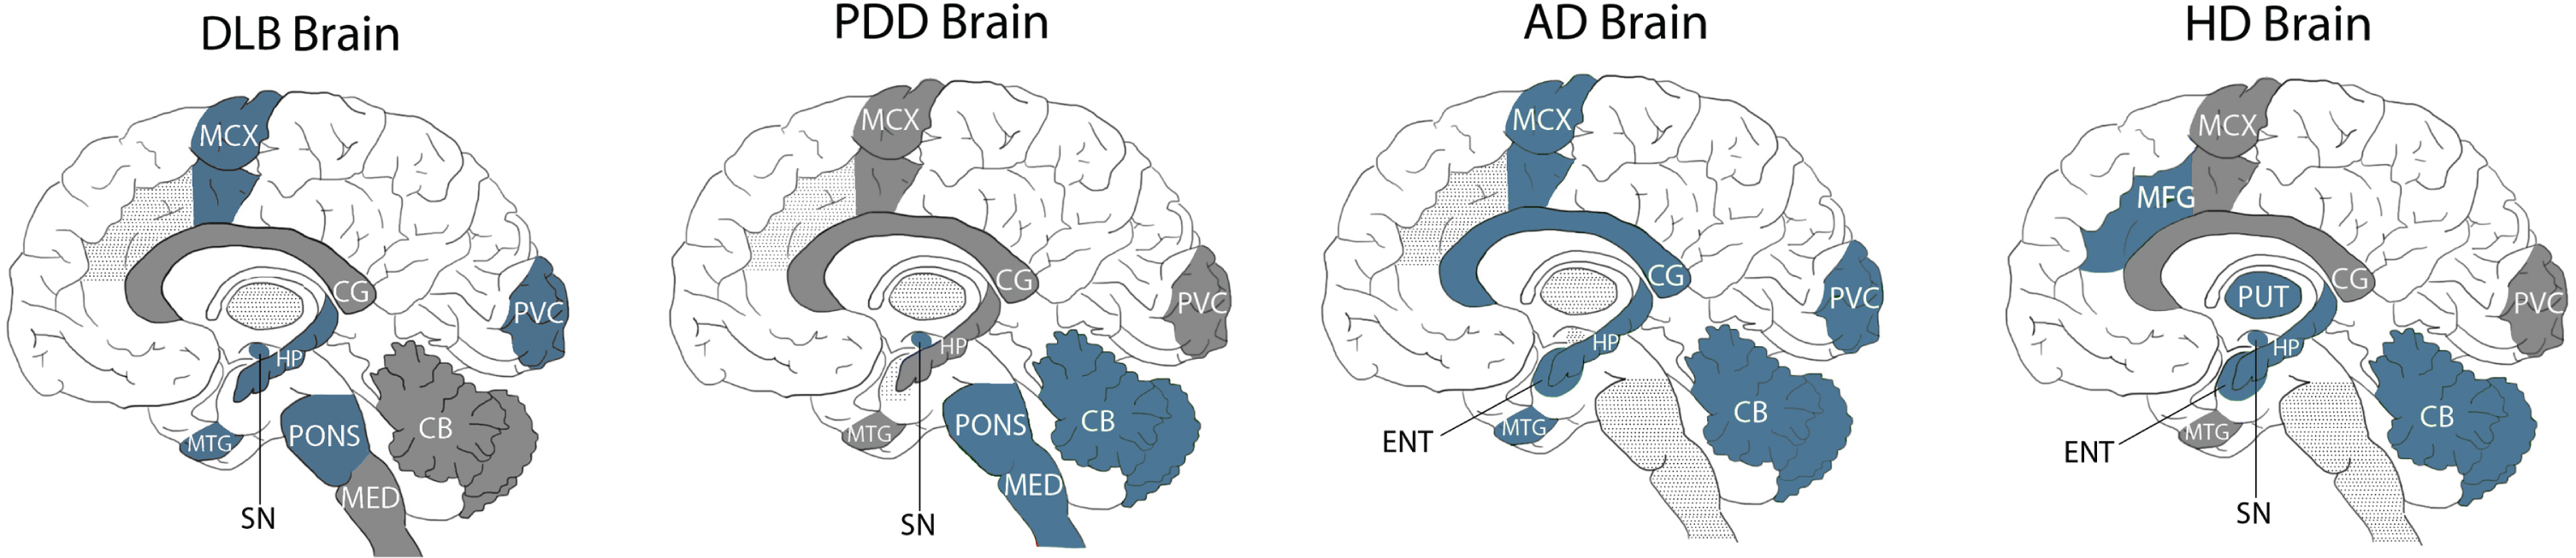 Comparison of pantothenic acid alterations in DLB, PDD, AD, and HD brains. Blue regions indicate decreases in pantothenic acid. Grey regions indicate no changes in pantothenic acid. Grey dotted shading indicates that region was not investigated in that condition. CB, Cerebellum; CG, Cingulate Gyrus; ENT, Entorhinal Cortex; HP, Hippocampus; MED, Medulla; MCX, Motor Cortex; MFG, Middle frontal gyrus; MTG, Middle Temporal Gyrus; PUT, Putamen; PVC, Primary visual cortex; SN, Substantia Nigra.